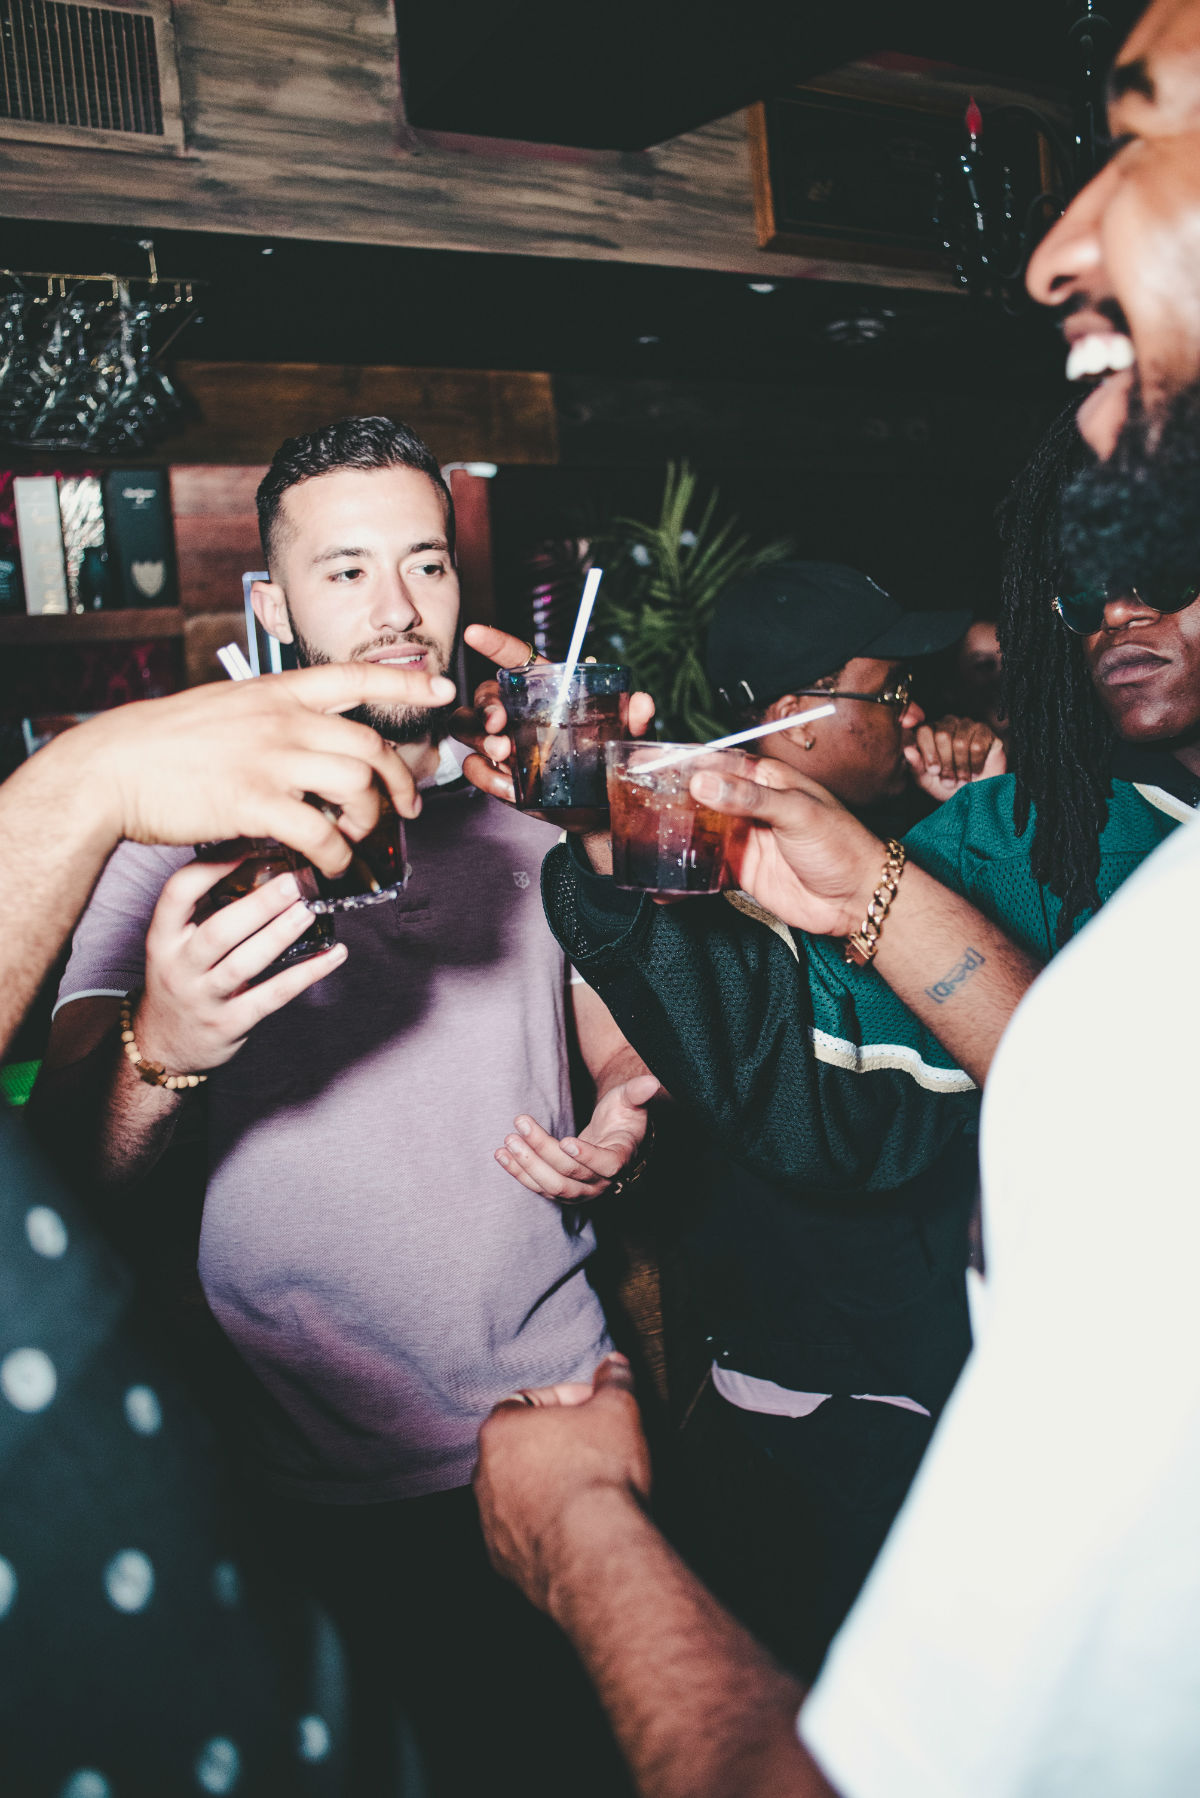 Stag party: 4 ideas for activities to try out among men